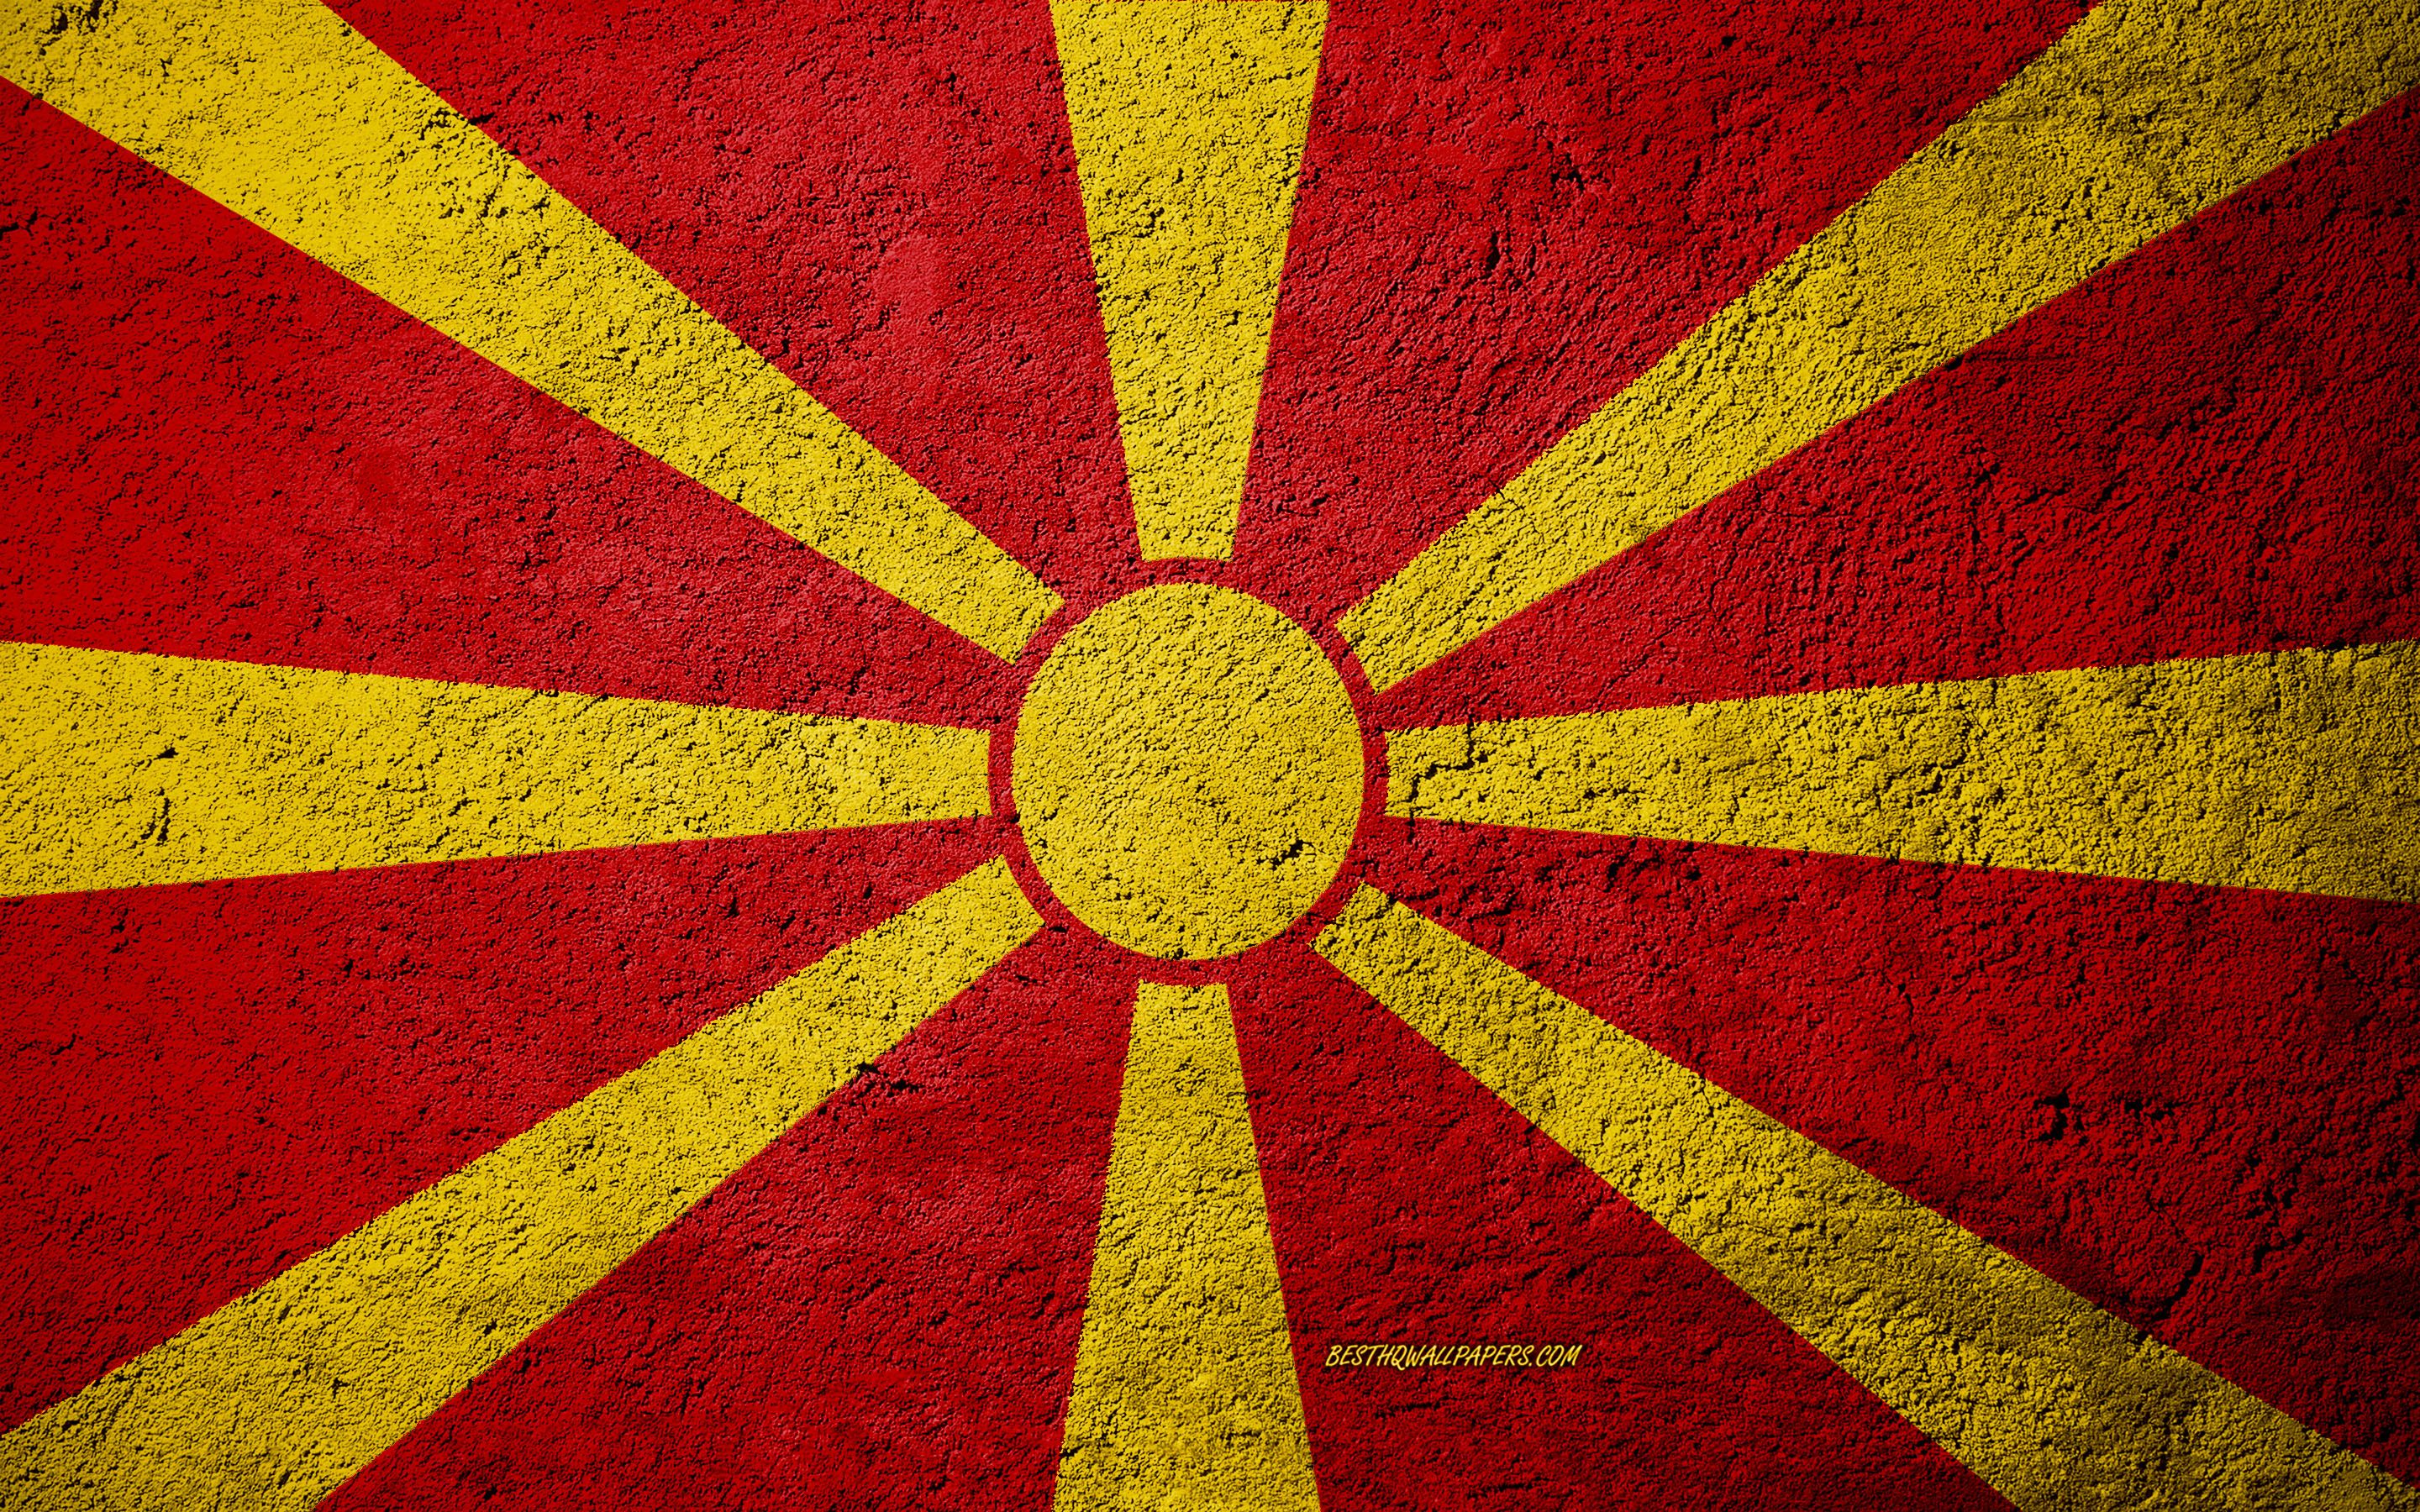 Download wallpaper Flag of North Macedonia, concrete texture, stone background, North Macedonia flag, Europe, North Macedonia, flags on stone for desktop with resolution 2880x1800. High Quality HD picture wallpaper